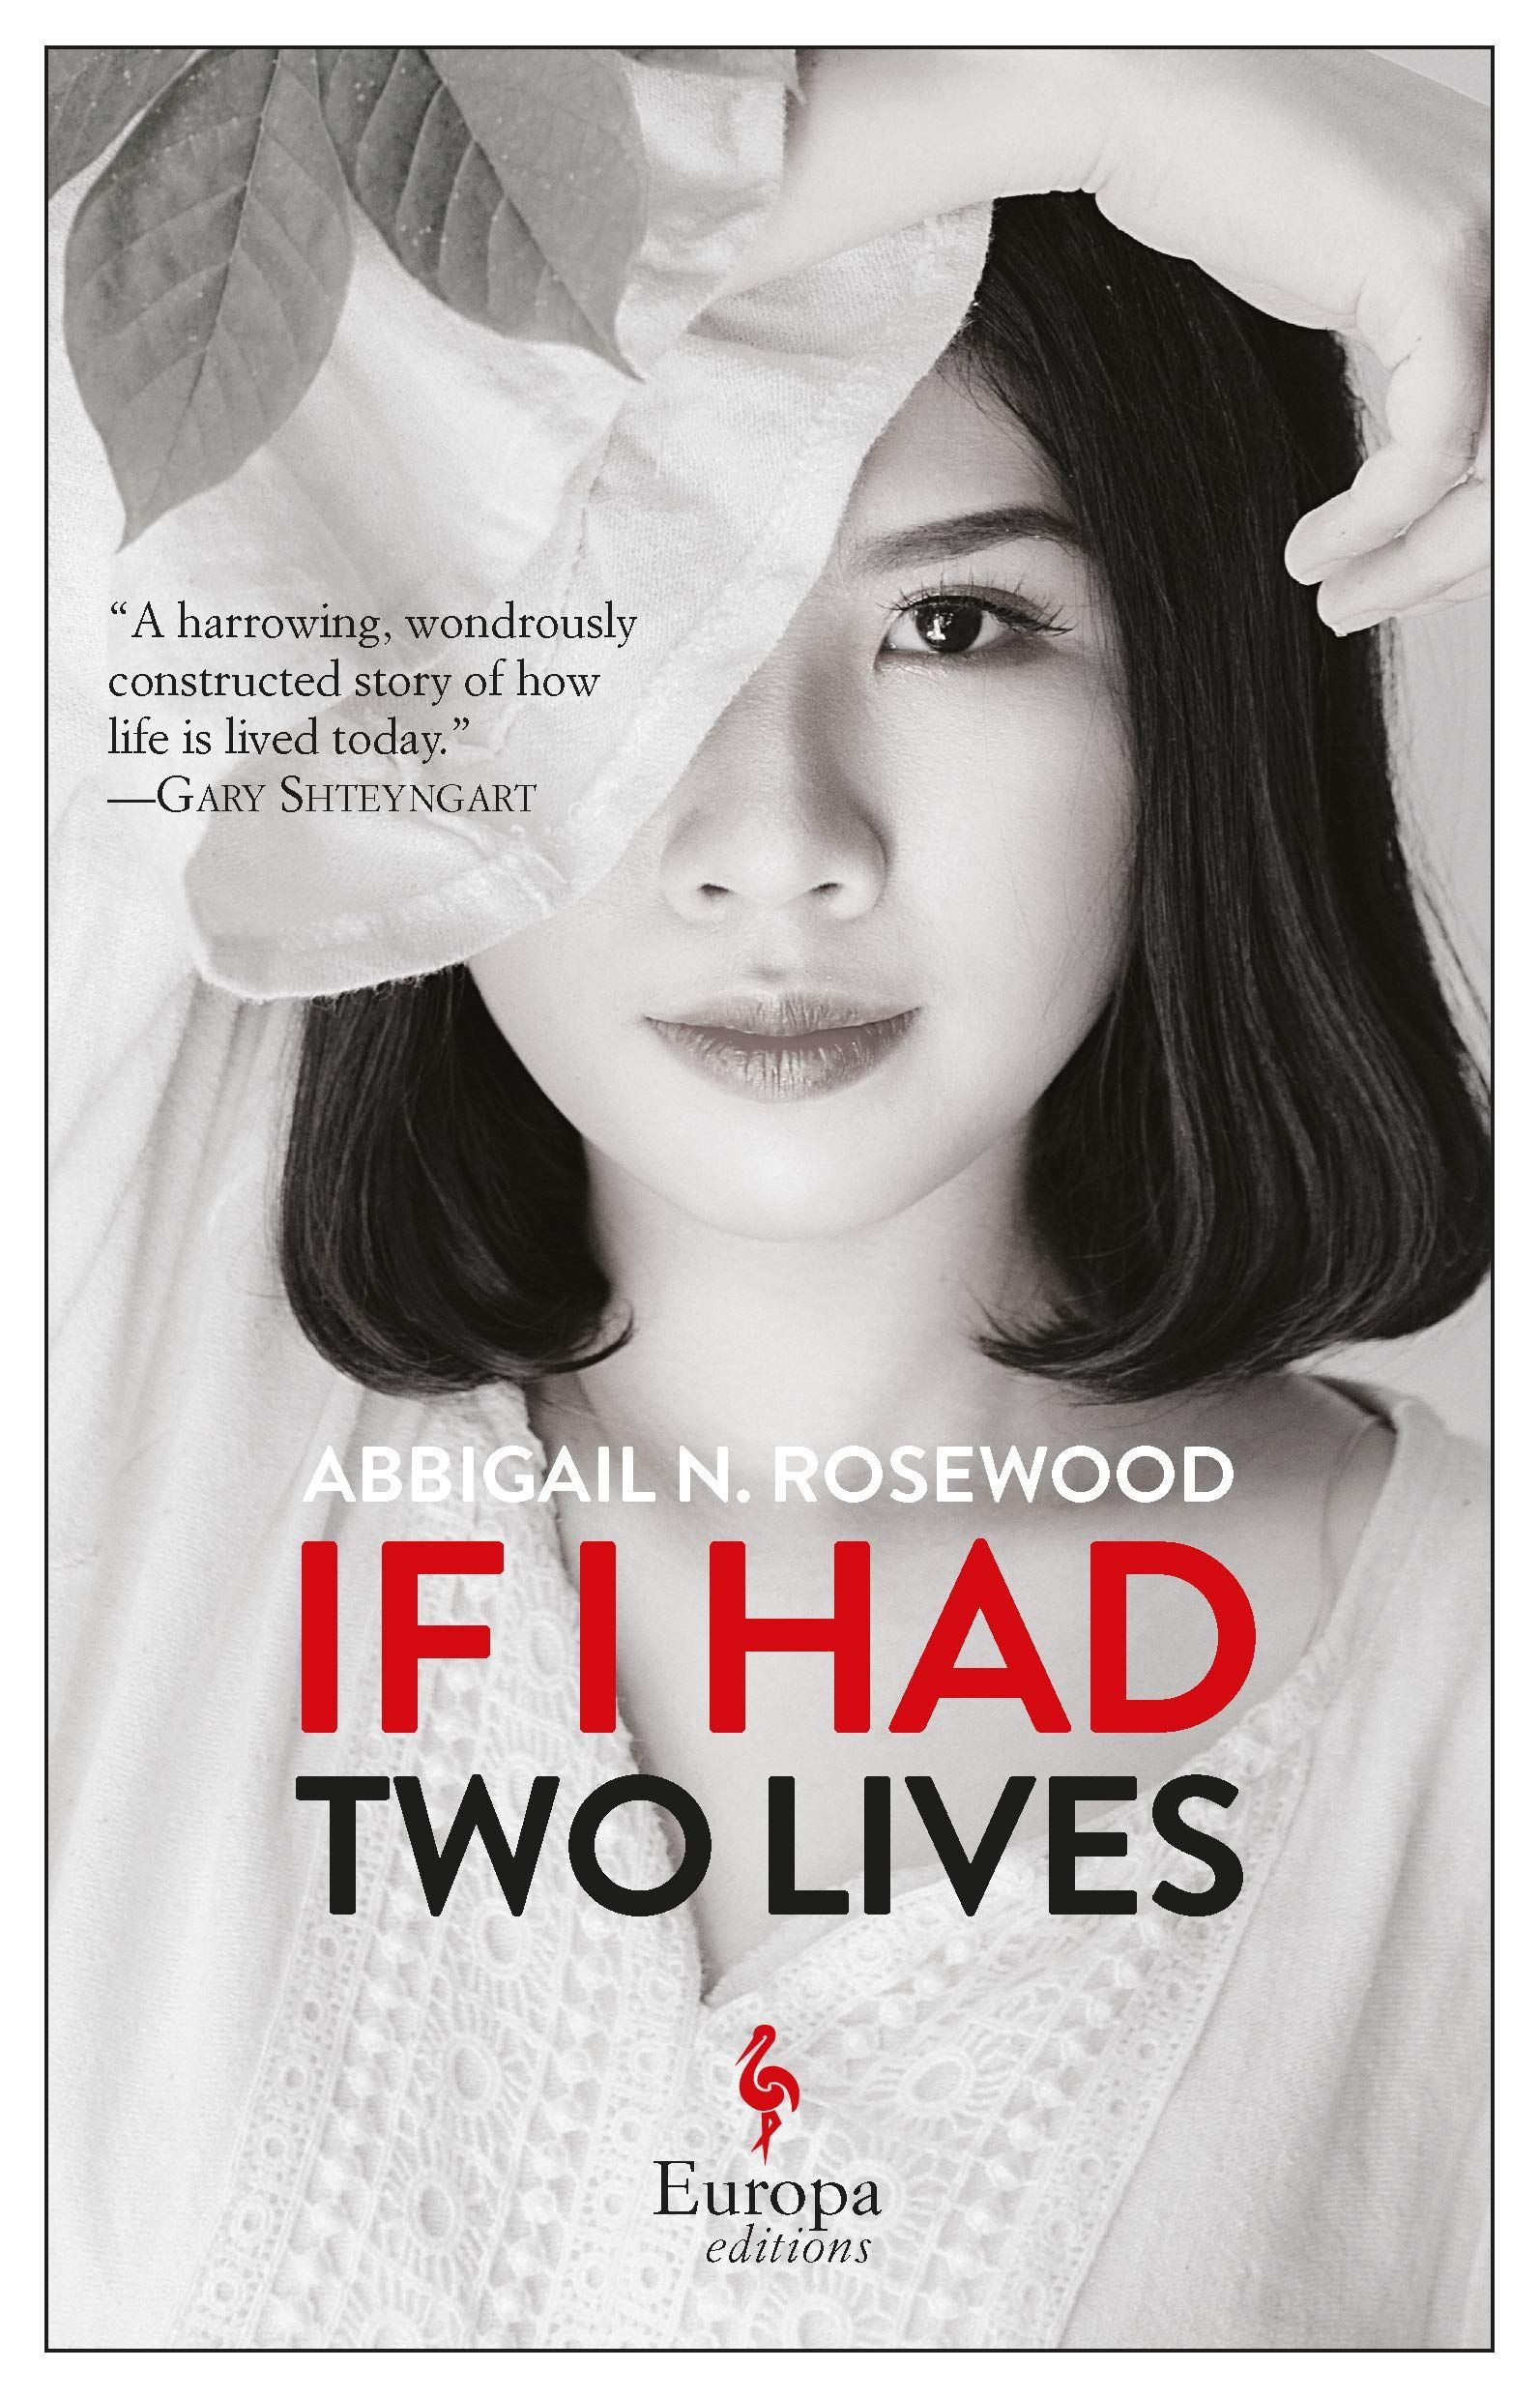 Home Is Where the Heart Breaks: Abbigail N. Rosewood’s “If I Had Two Lives”